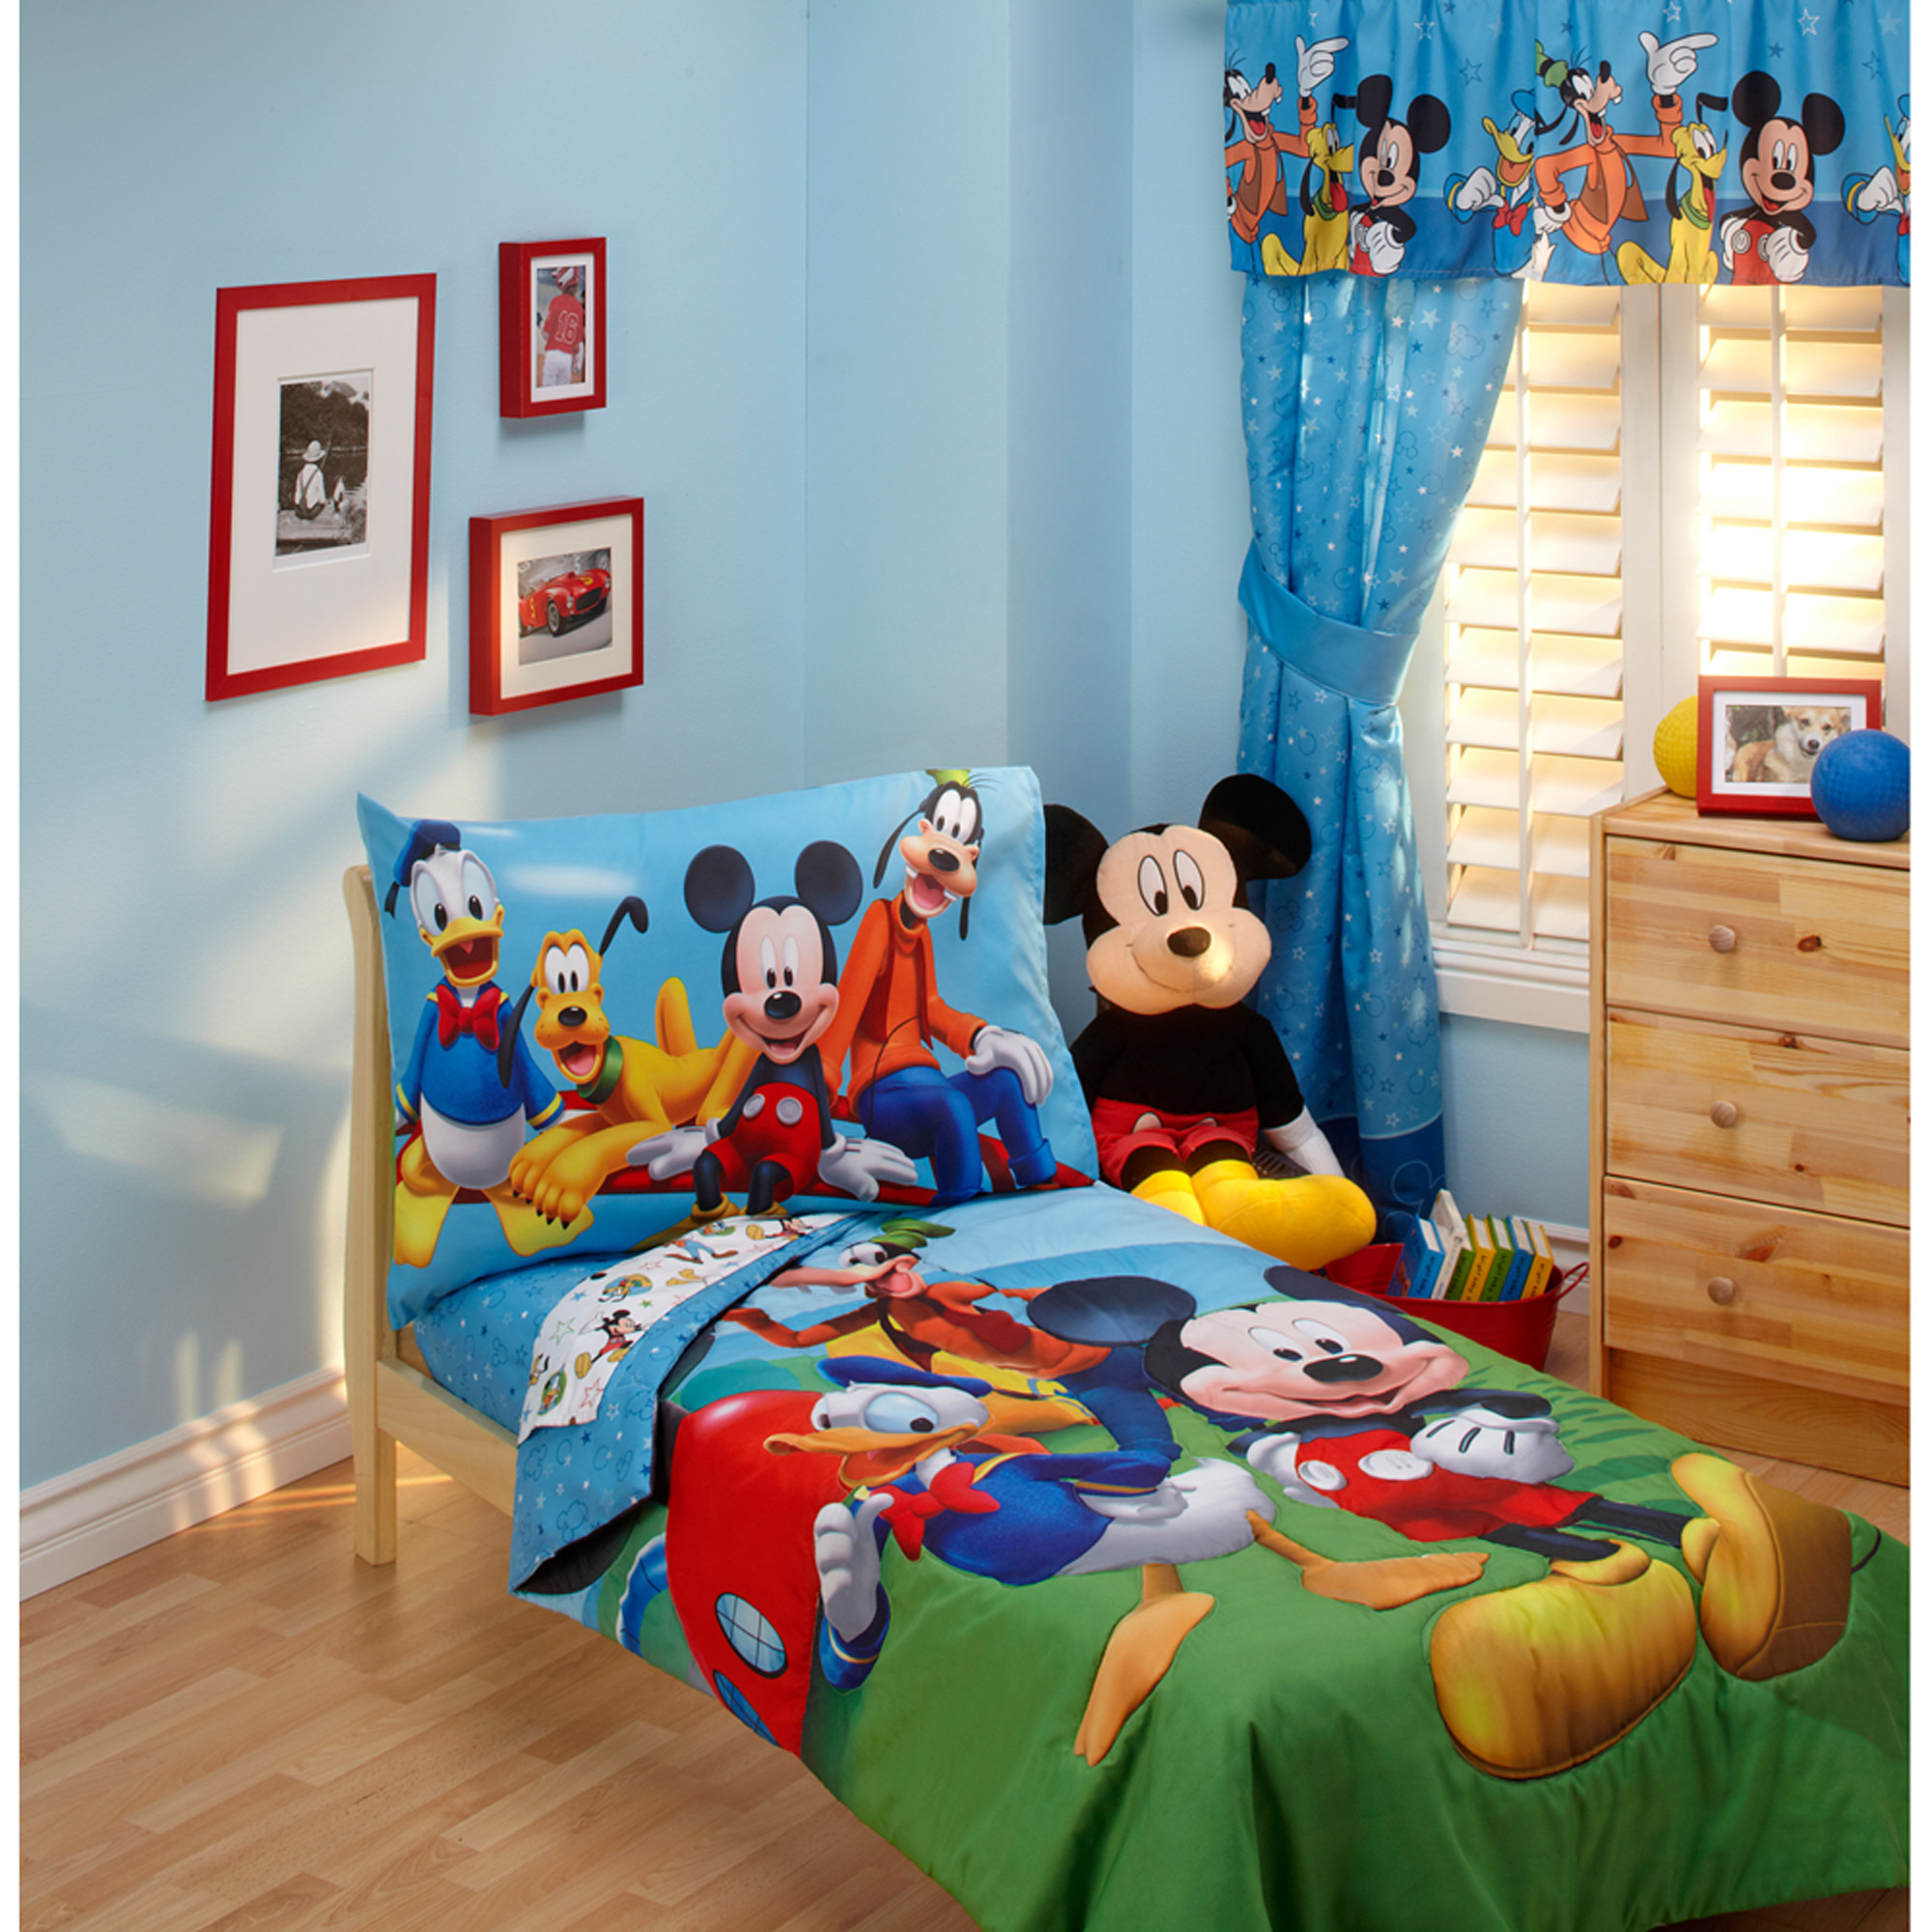 Disney Mickey Mouse Toddler Bed And Bedding Value Bundle Walmart within size 2000 X 2000